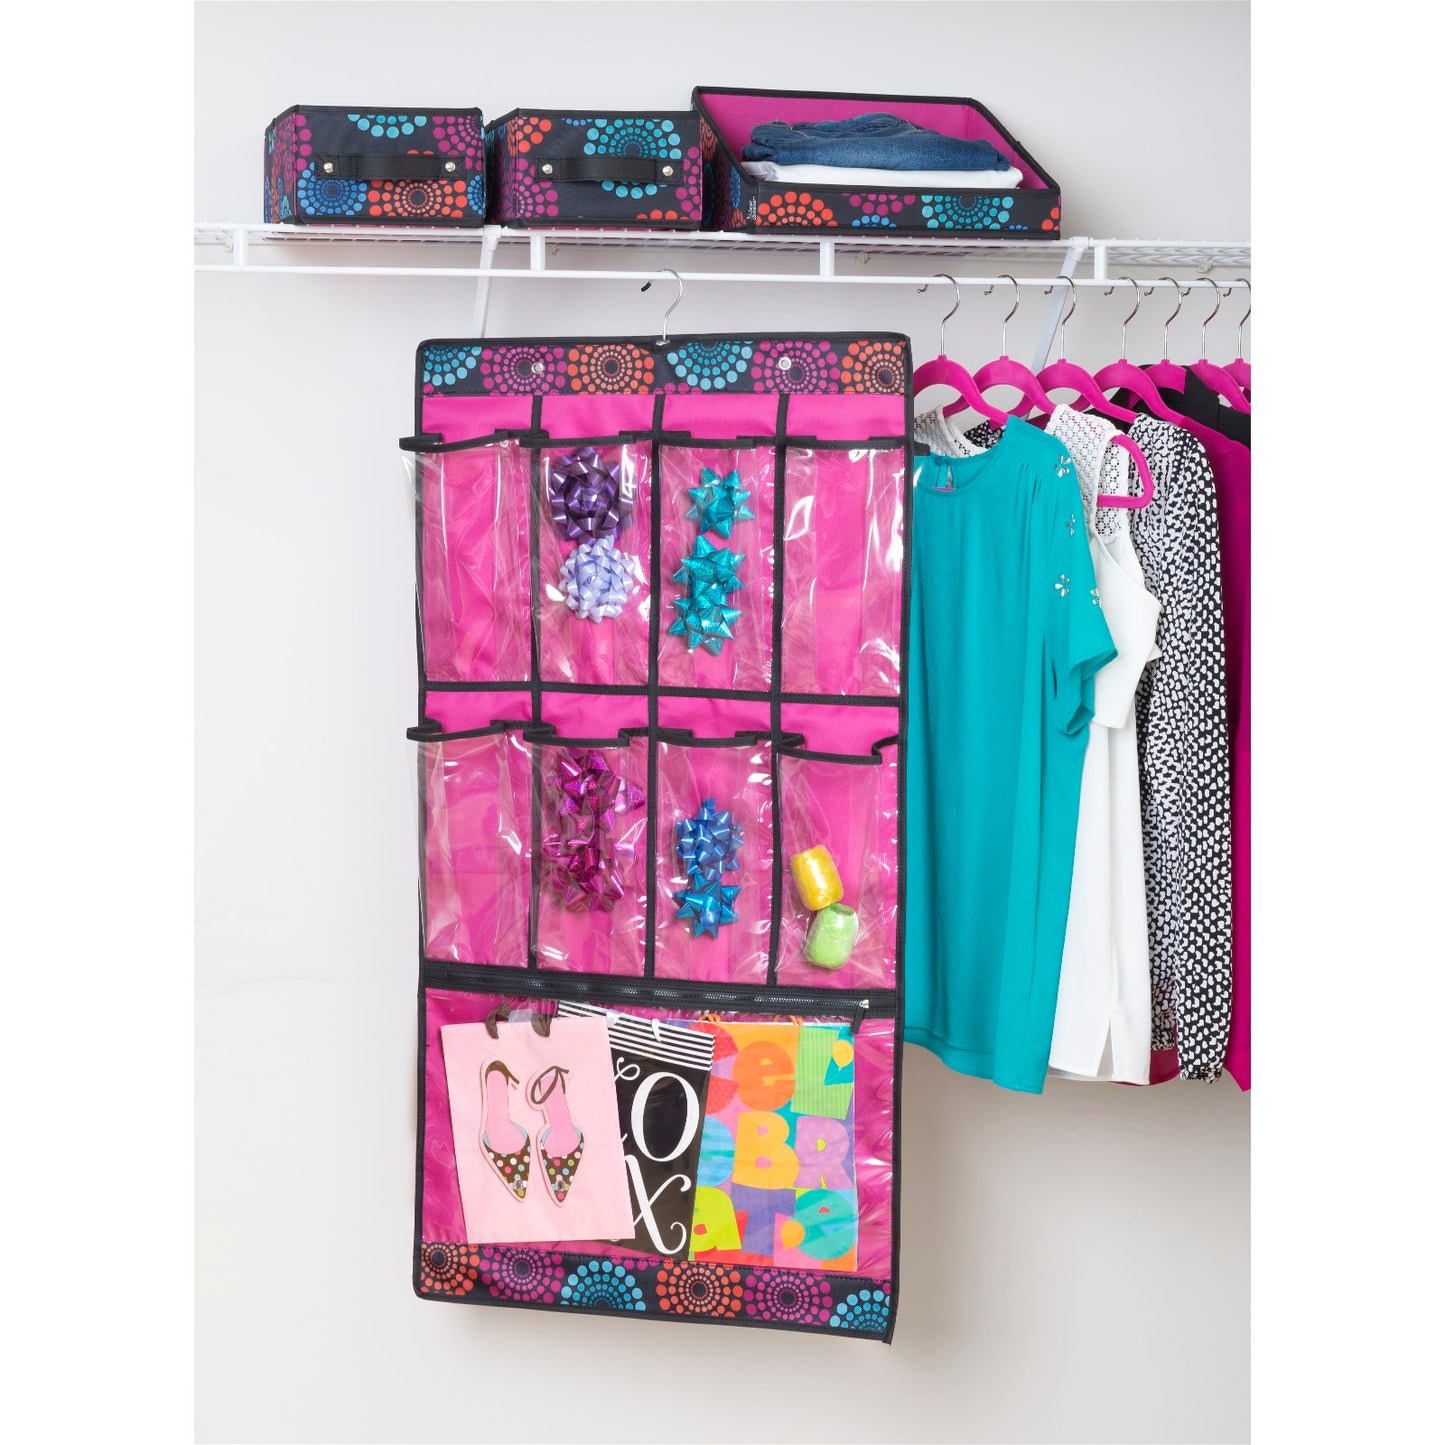 Hanging Pocket Cubby - Bright Lights